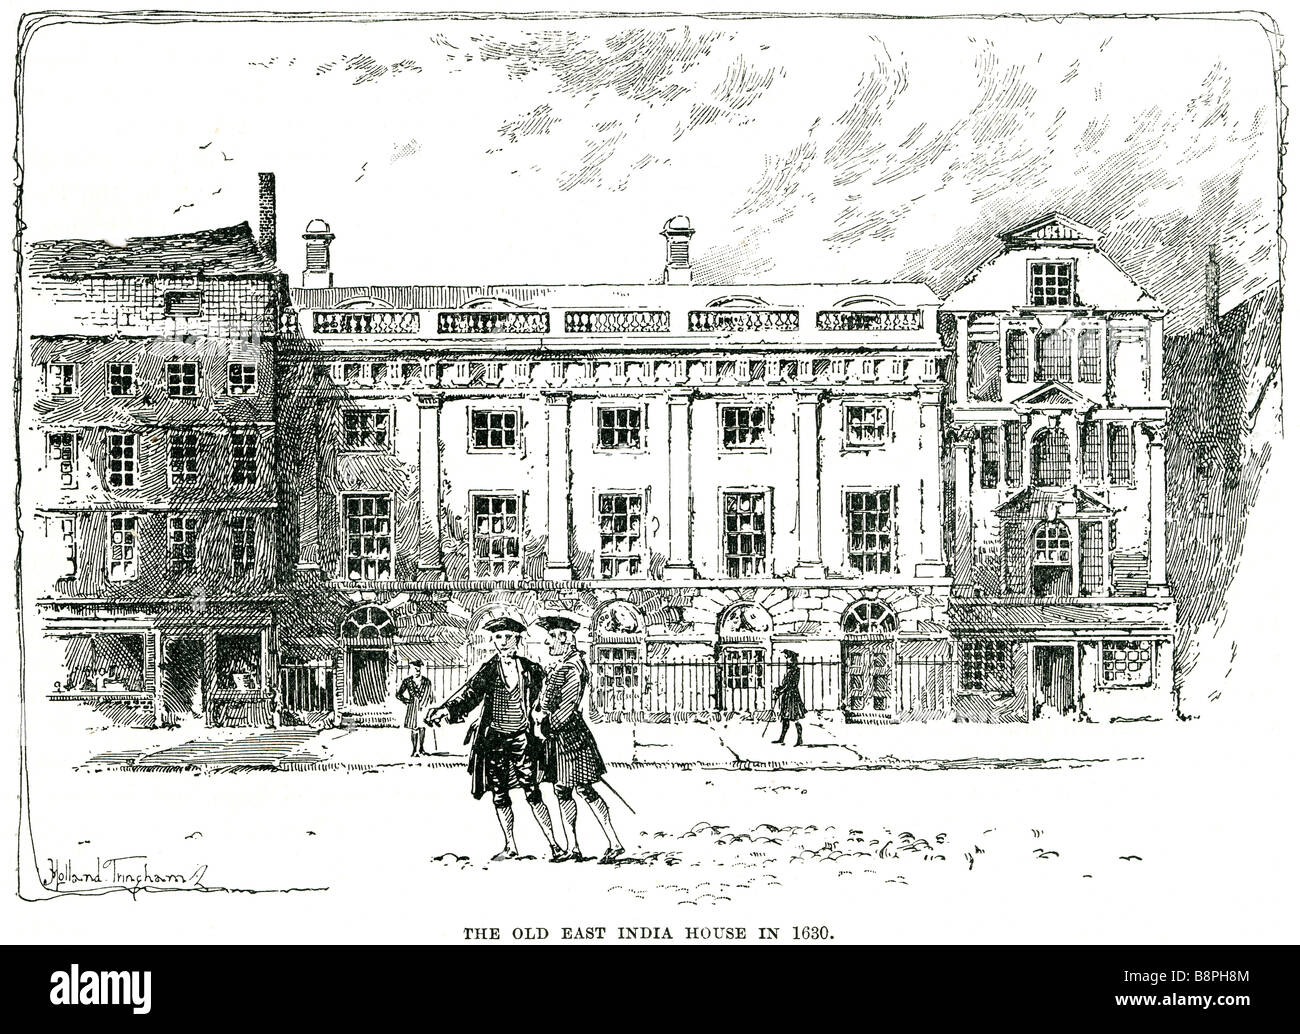 the old east india house in 1630 street road cobbled georgan period dress pedestrians pedestrian house manor The East India Comp Stock Photo